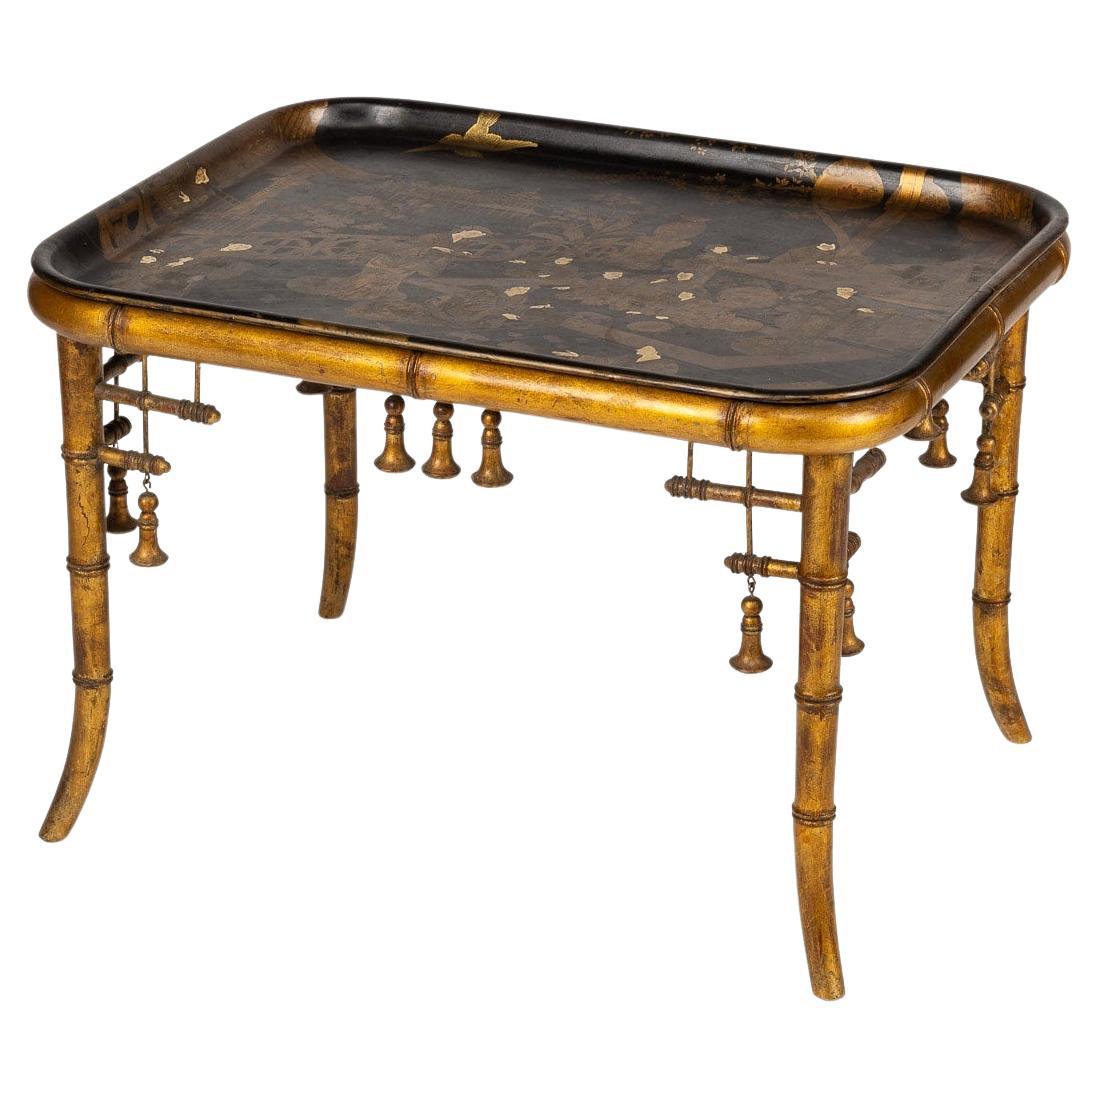 20th Century French Giltwood & Japanese Style Lacquer Table with Tray, C.1880 For Sale